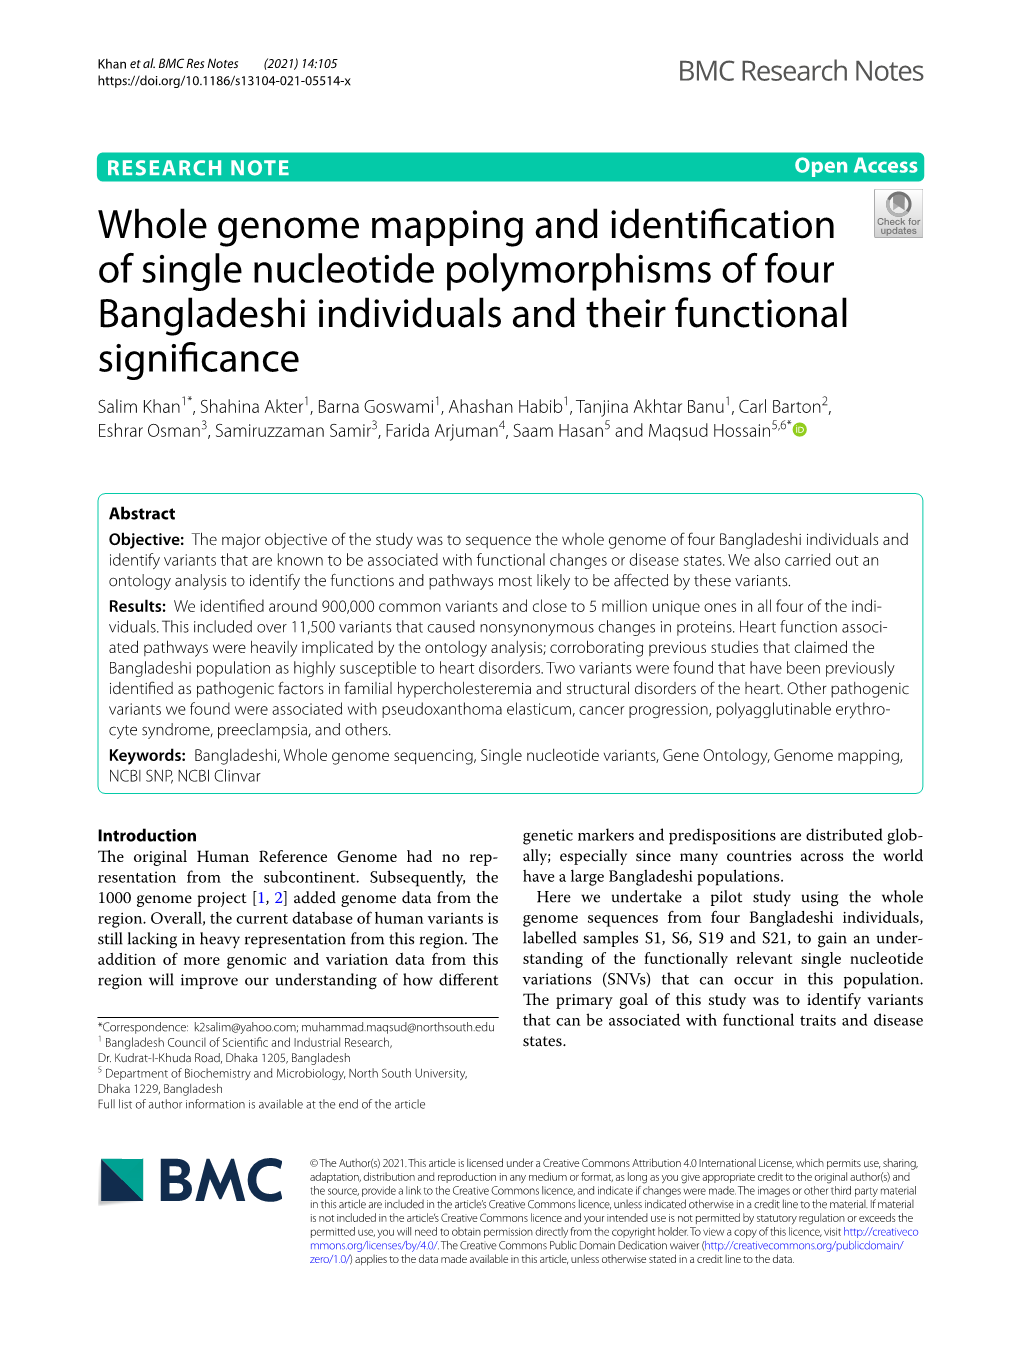 Whole Genome Mapping and Identification of Single Nucleotide